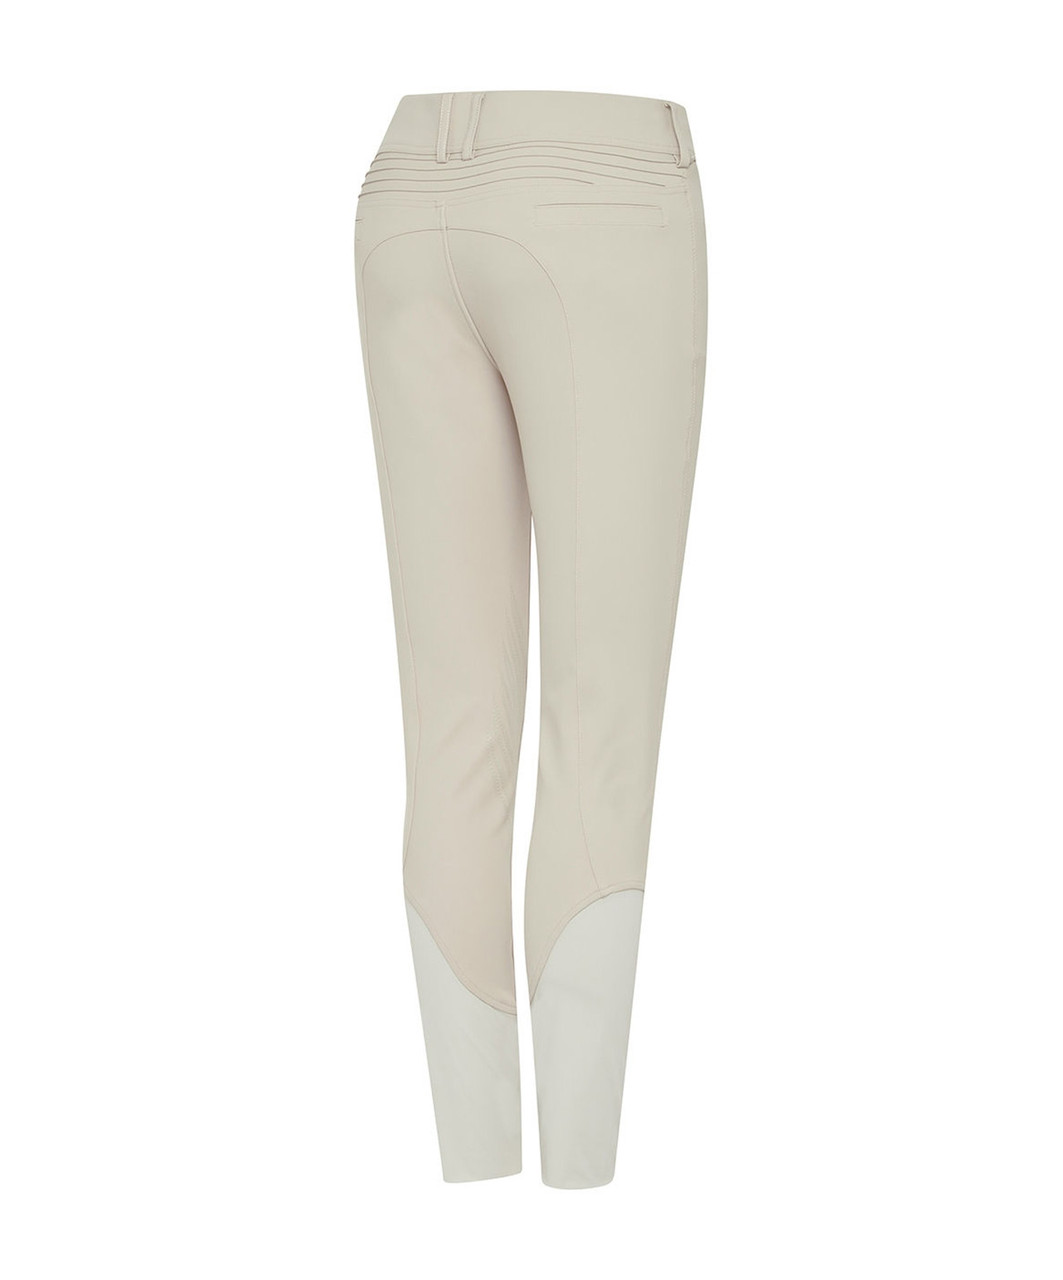 CLEAROUT-Samshield Chloe Embroidered Ladies Schooling Breech